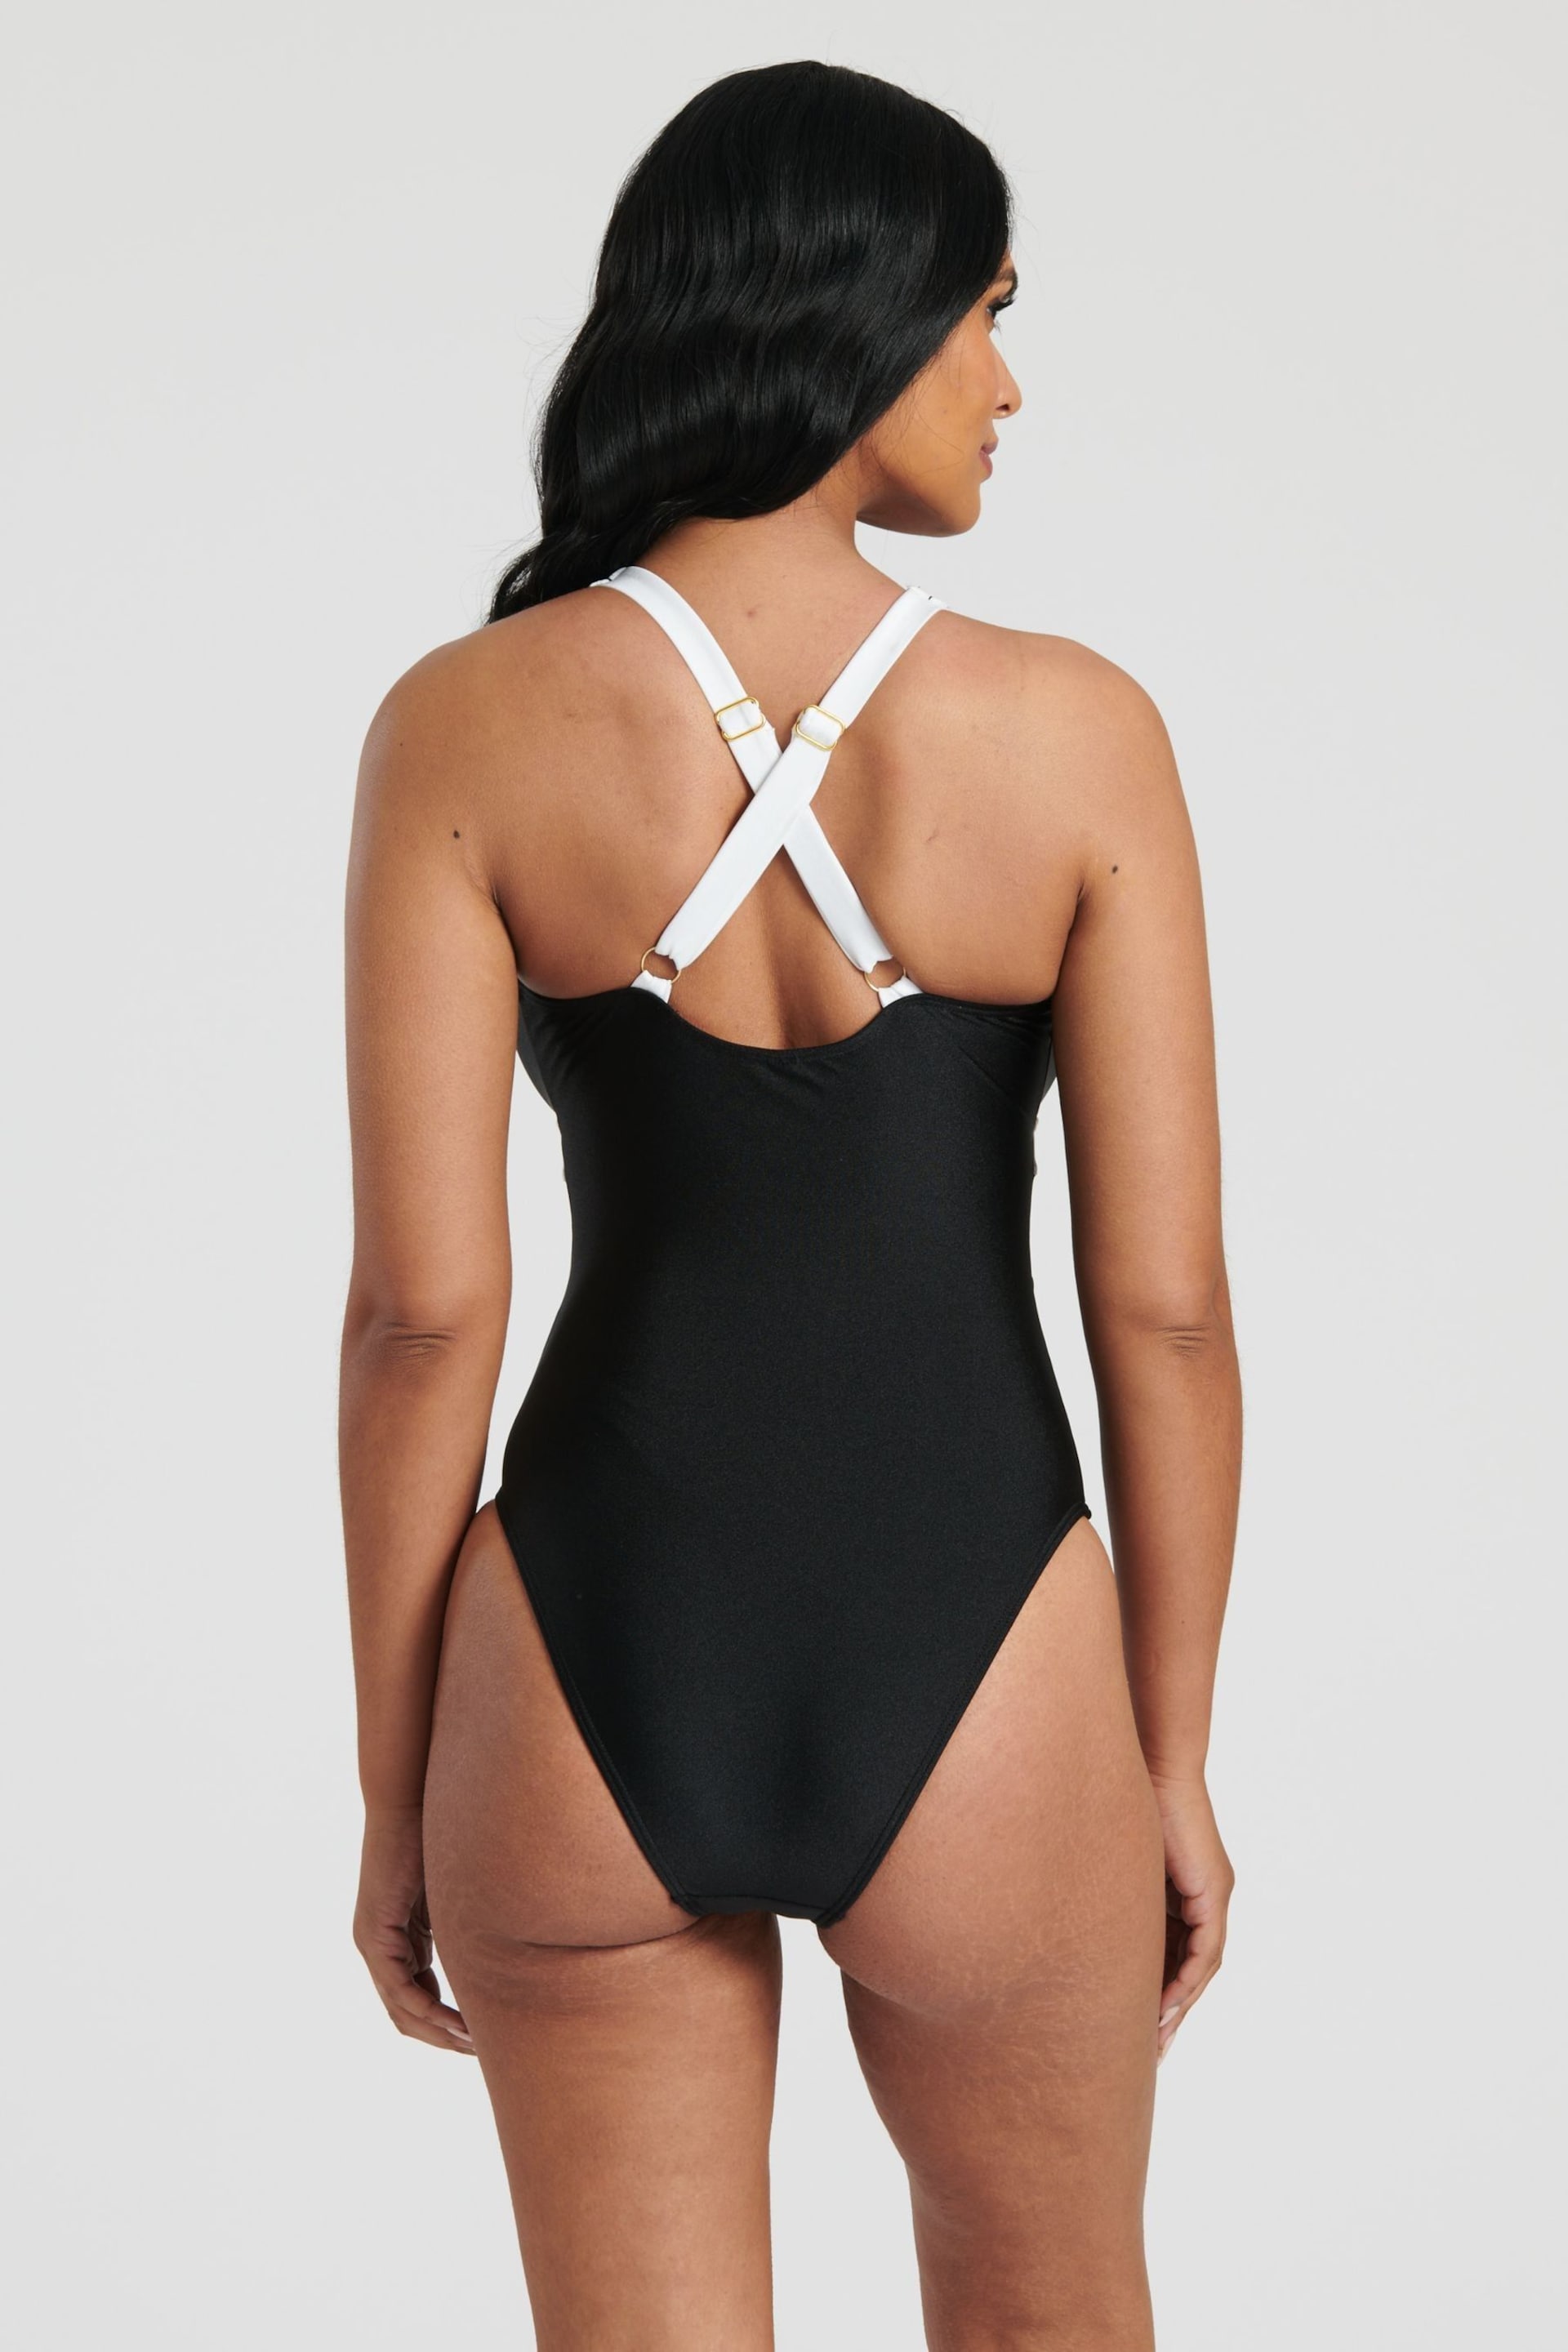 South Beach Monochrome Mesh Plunge Swimsuit - Image 6 of 6